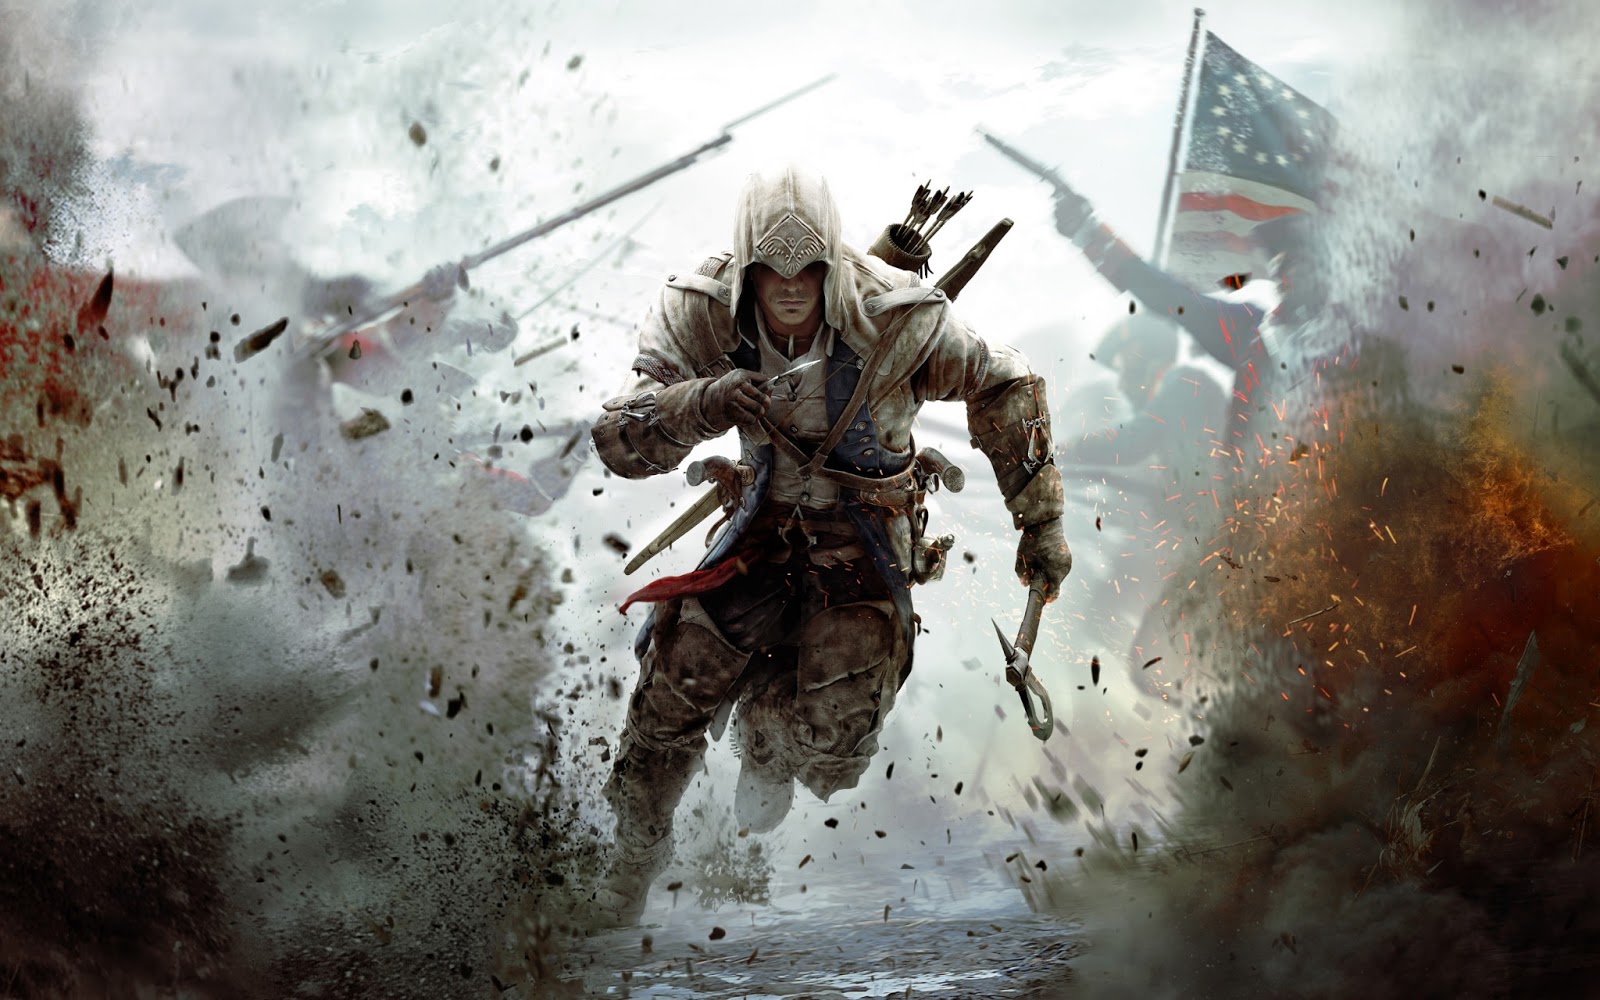 assassins creed laptop Wallpapers